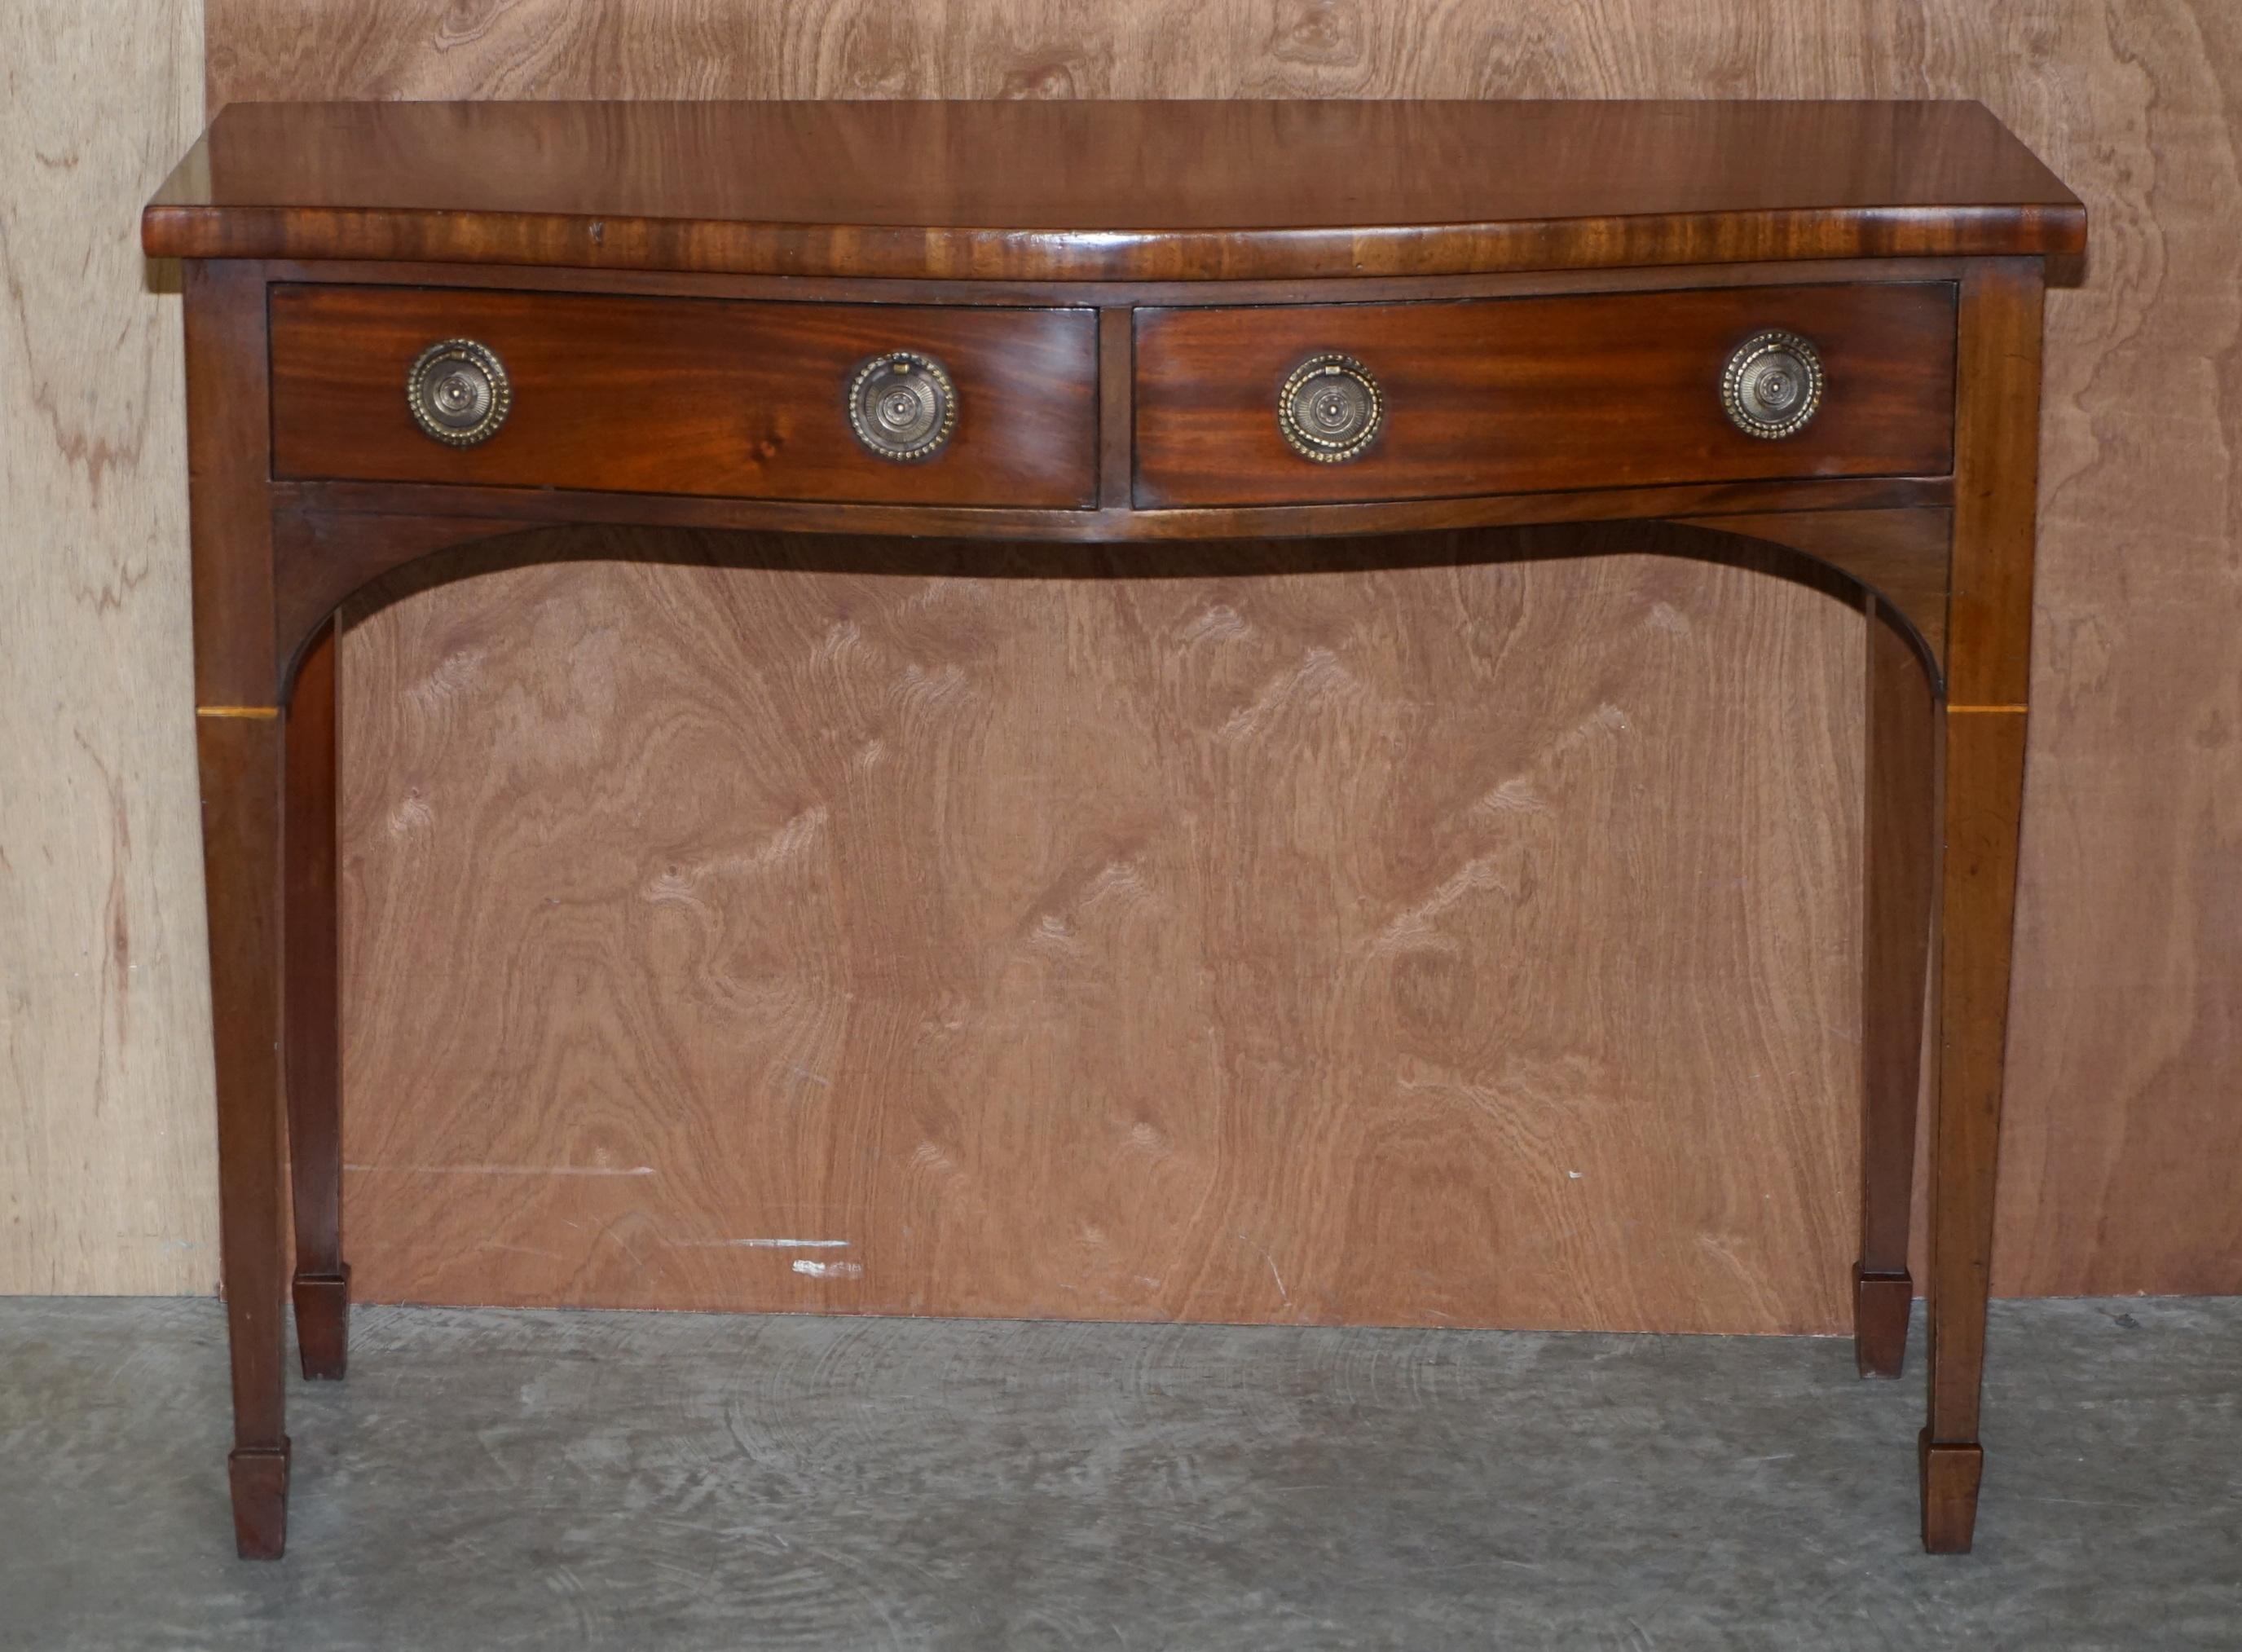 We are delighted to offer for sale this stunning extremely rare pair of original, fully restored, early Victorian Mahogany Howard & Son’s Berners Street large console tables with twin drawers in the Georgian taste.

This is a very interesting